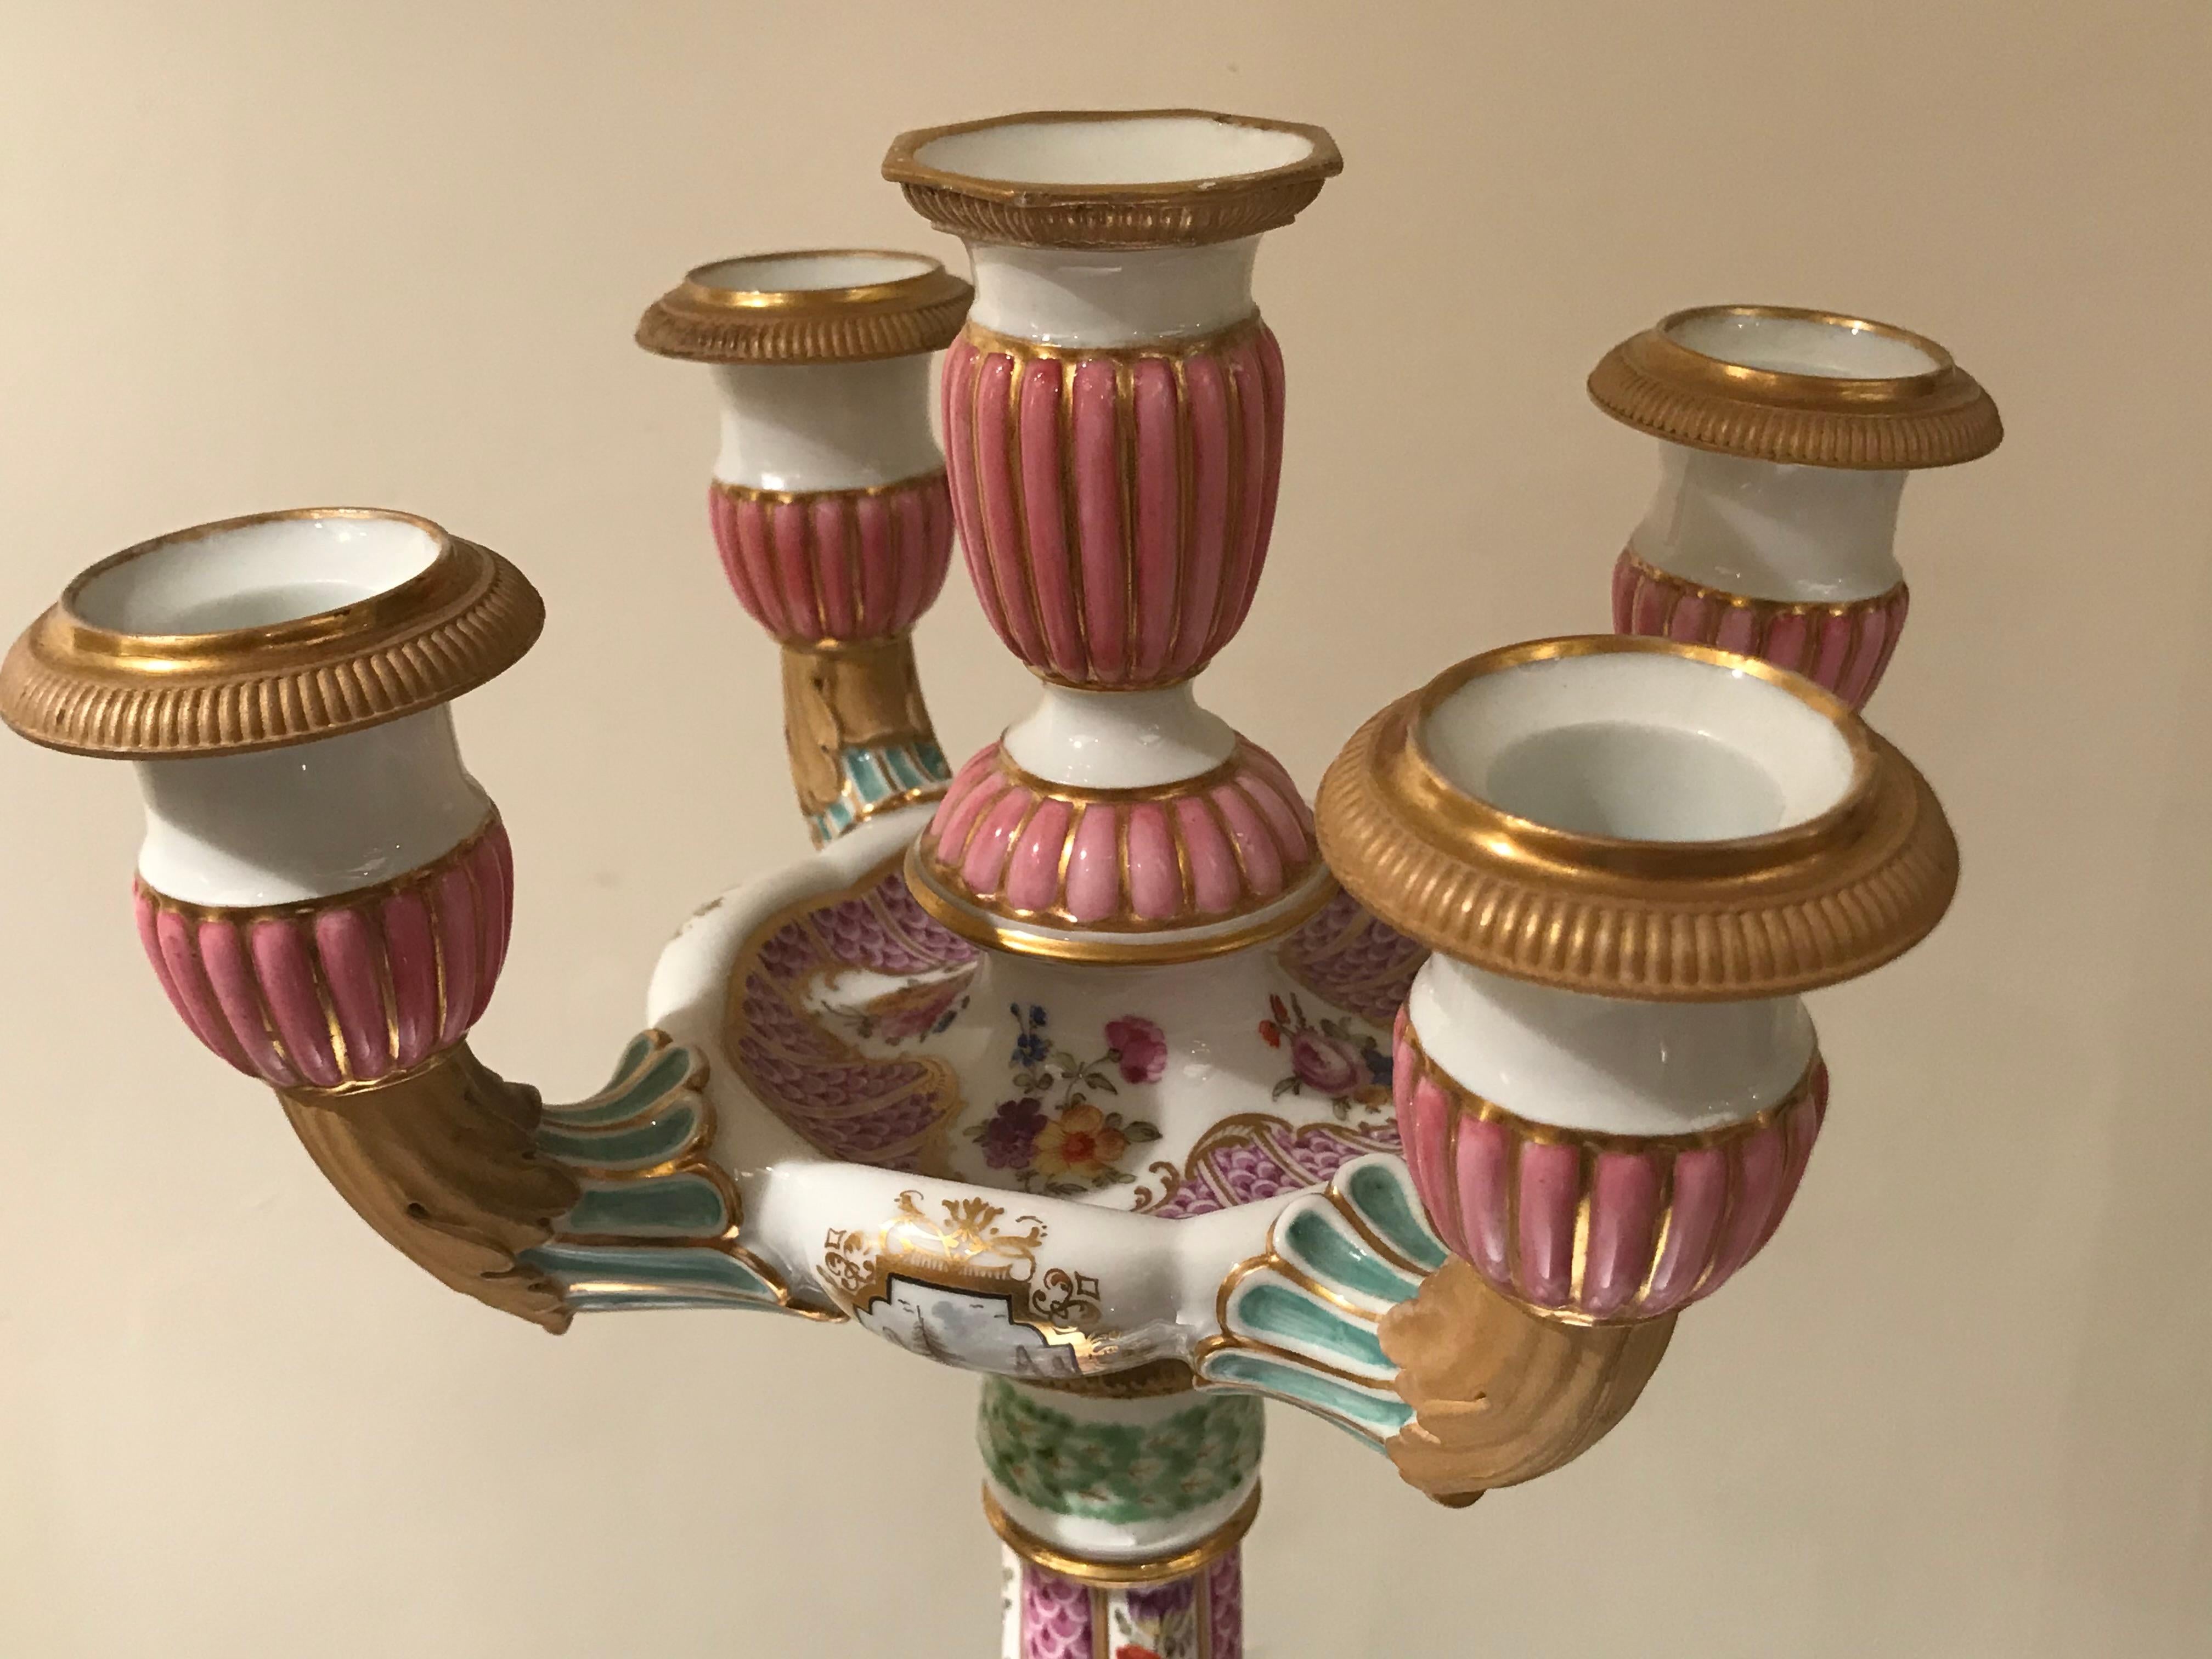 Girandoles / Table Candlesticks in Porcelain from Meissen, Germany, 1790 - 1810 In Good Condition For Sale In Mönchengladbach, NW